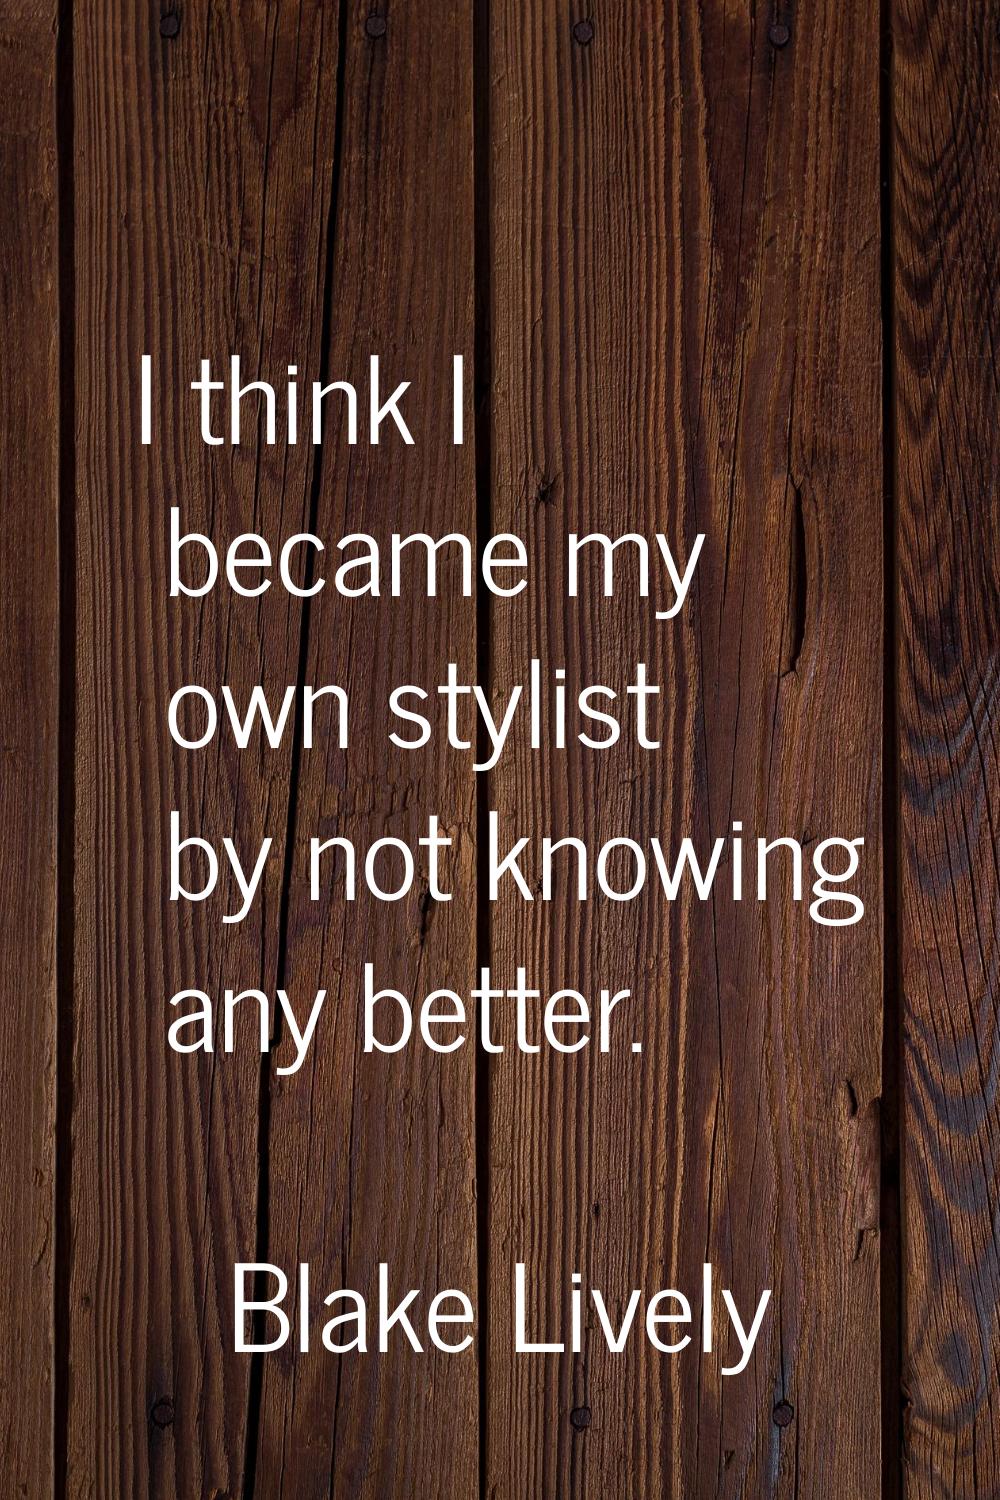 I think I became my own stylist by not knowing any better.